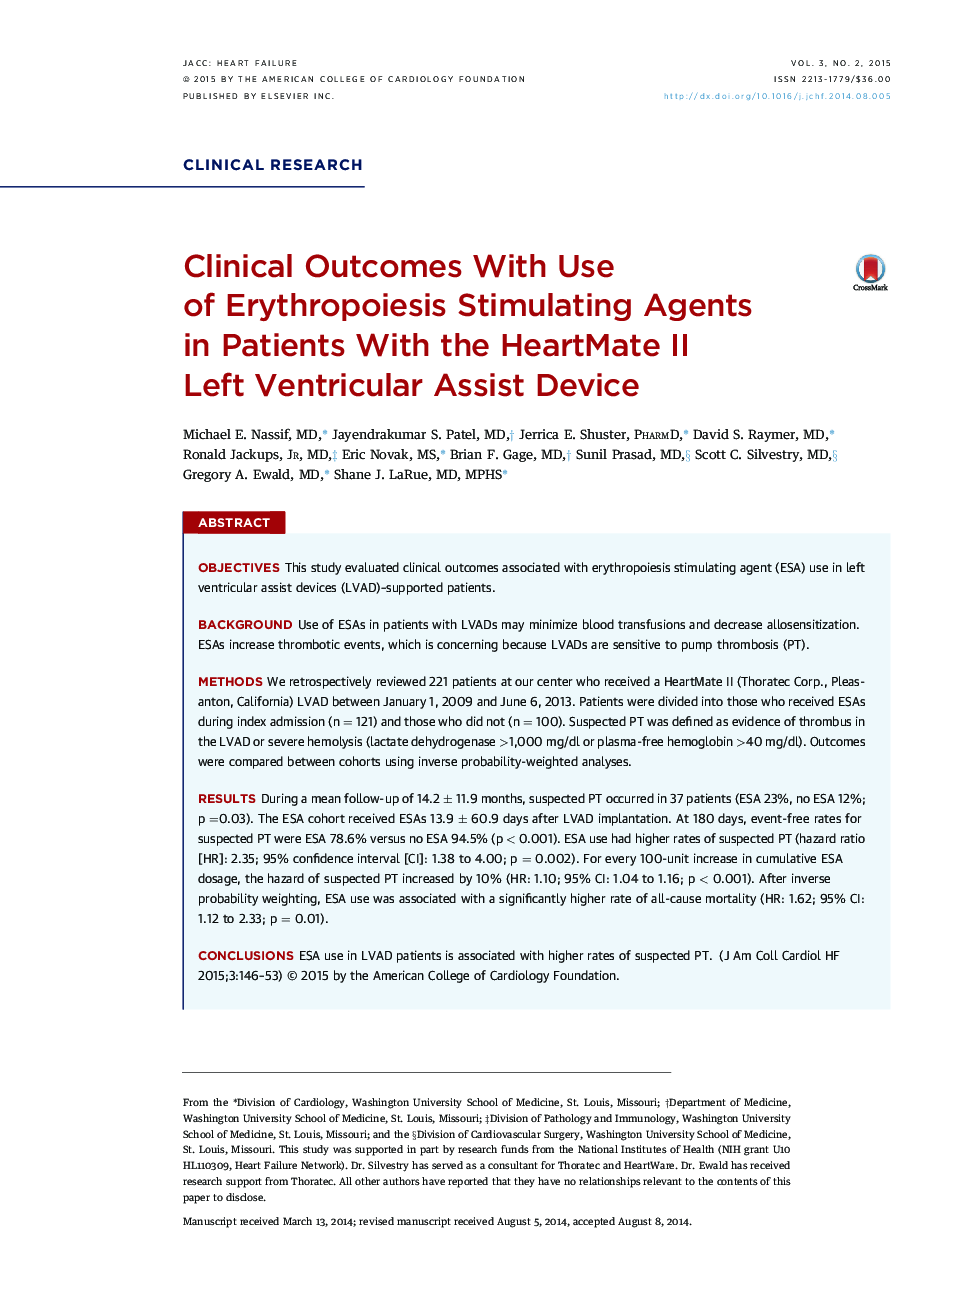 Clinical Outcomes With Use of Erythropoiesis Stimulating Agents in Patients With the HeartMate II Left Ventricular Assist Device 